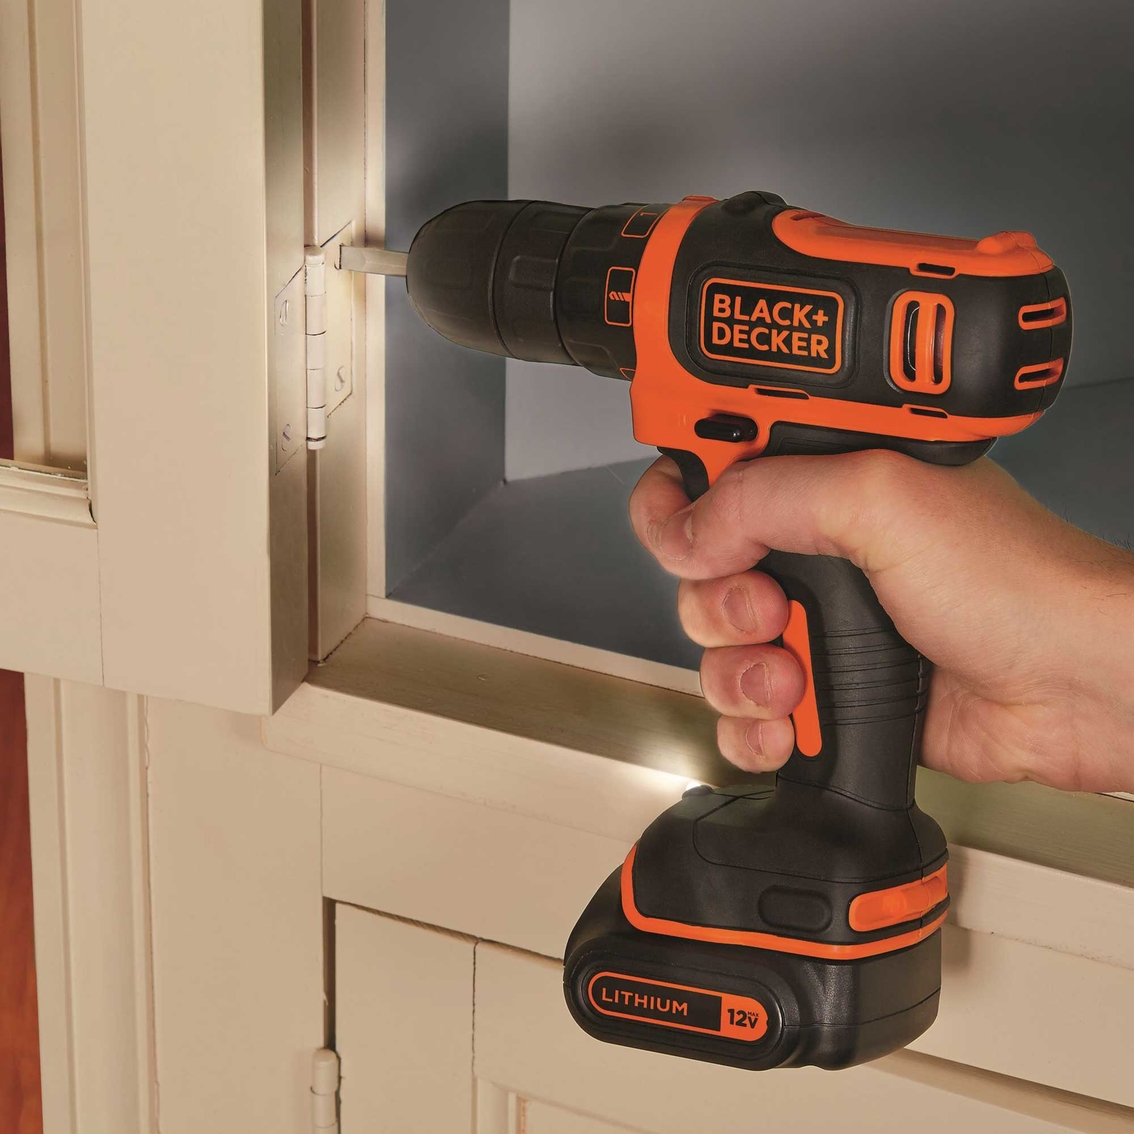 Black + Decker 12V Max Cordless Lithium Drill/Driver Project Kit - Image 5 of 10